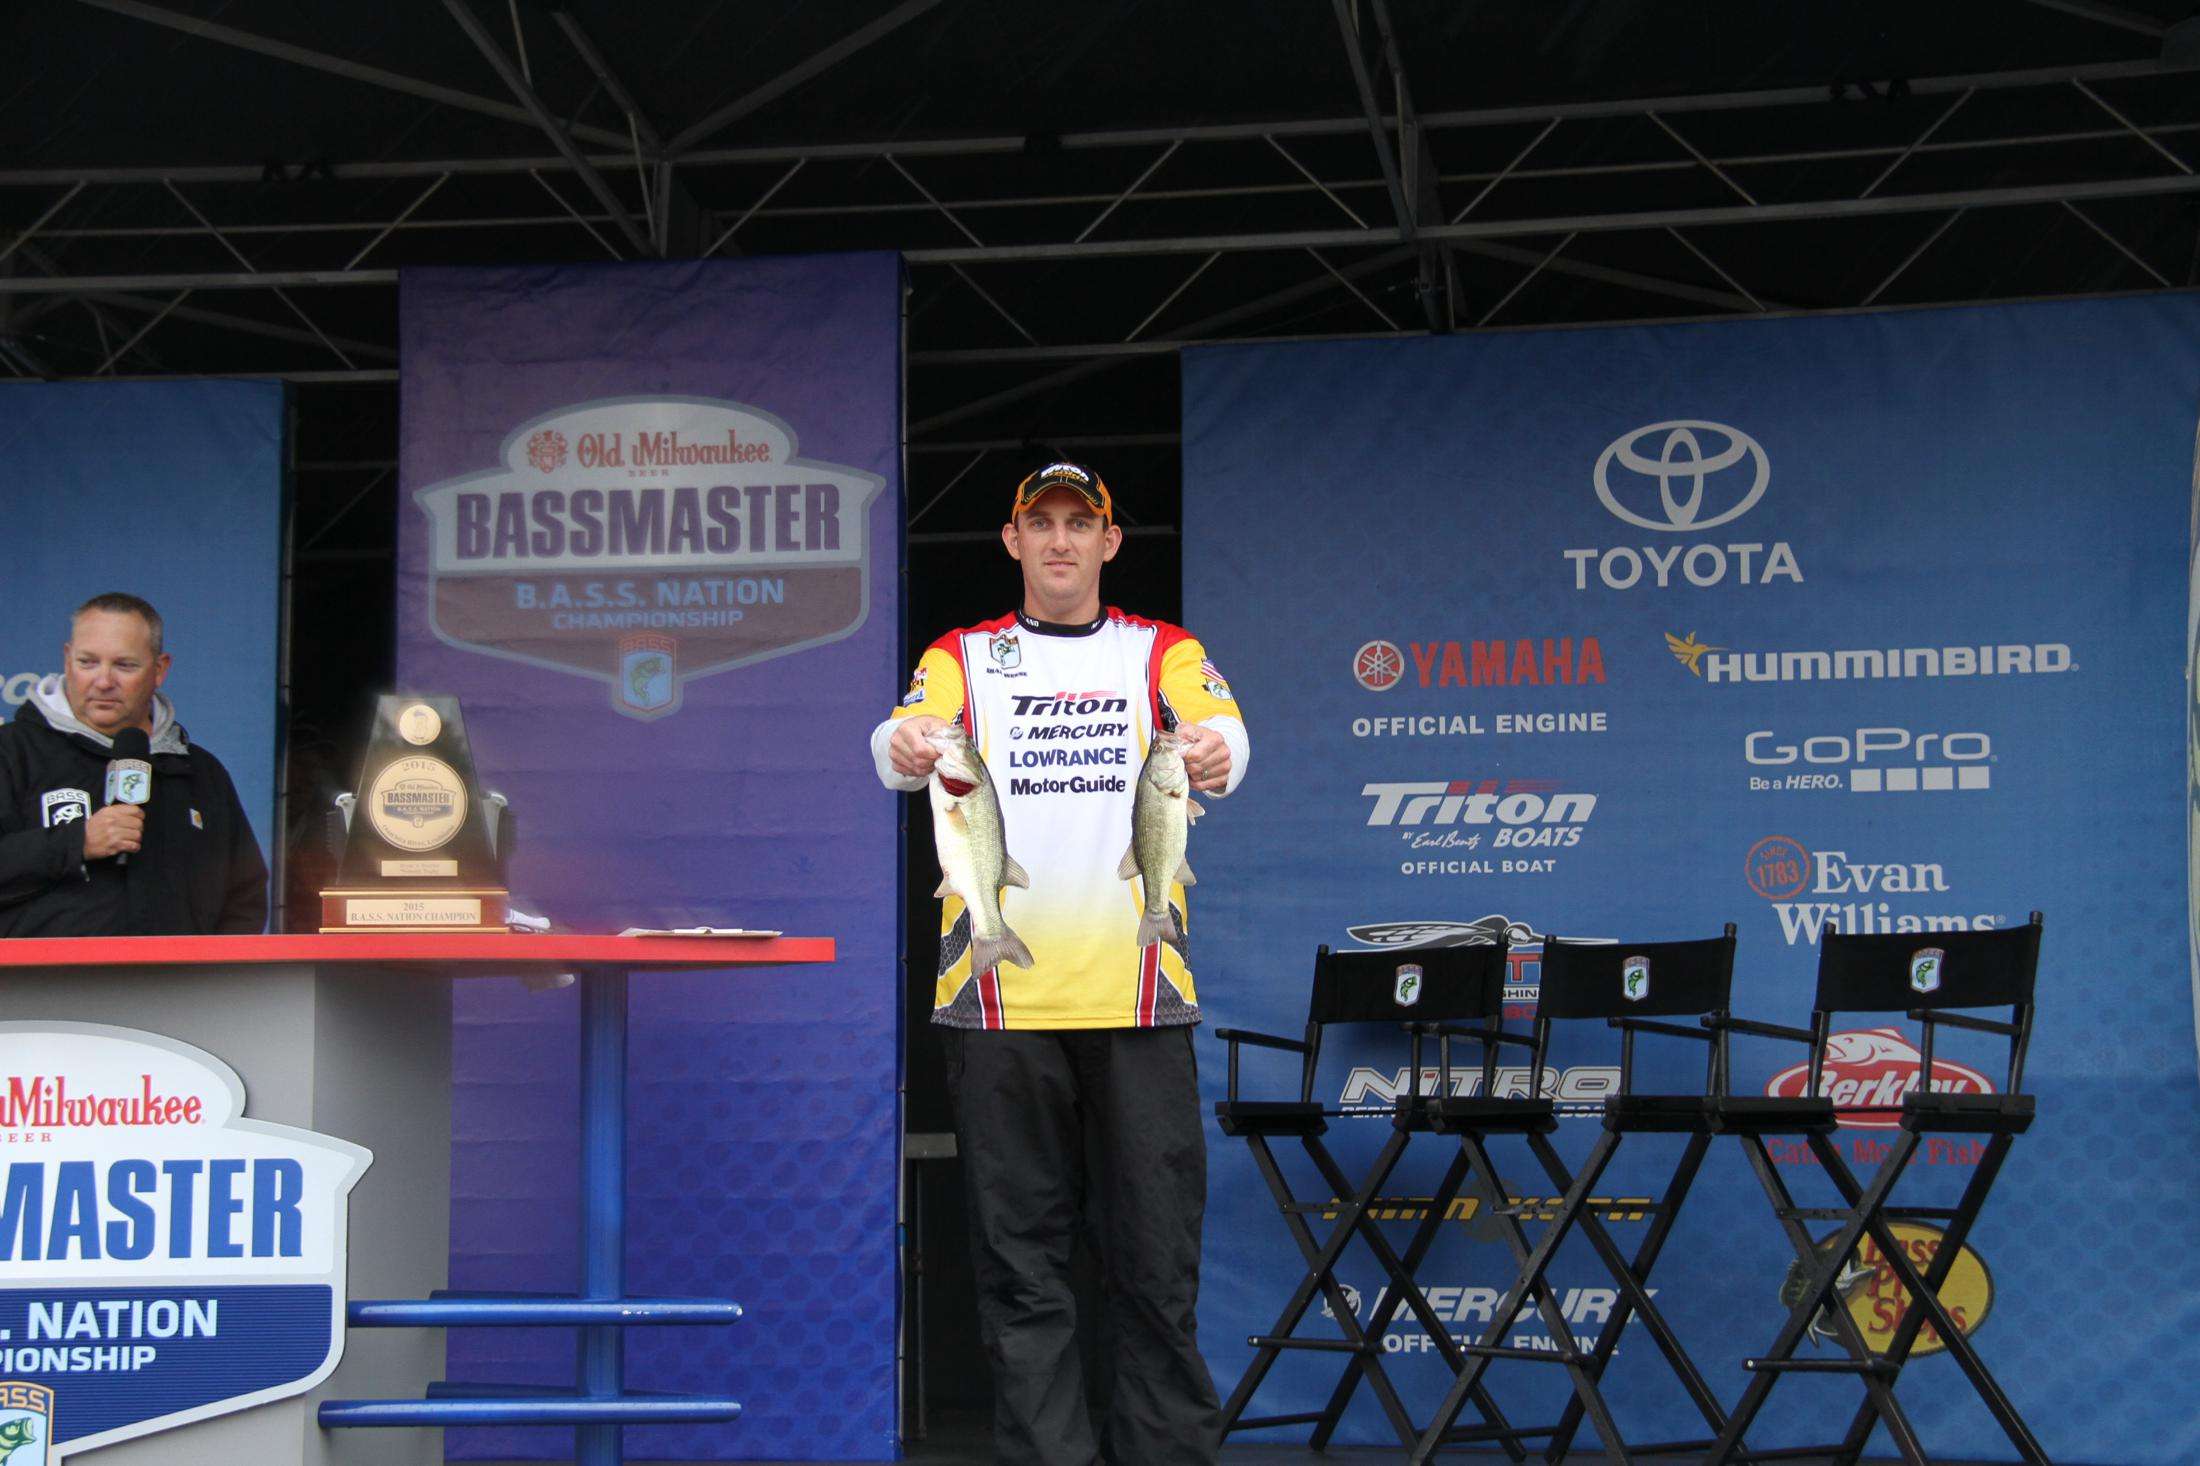 Brad Weese, 20-9, 32nd place